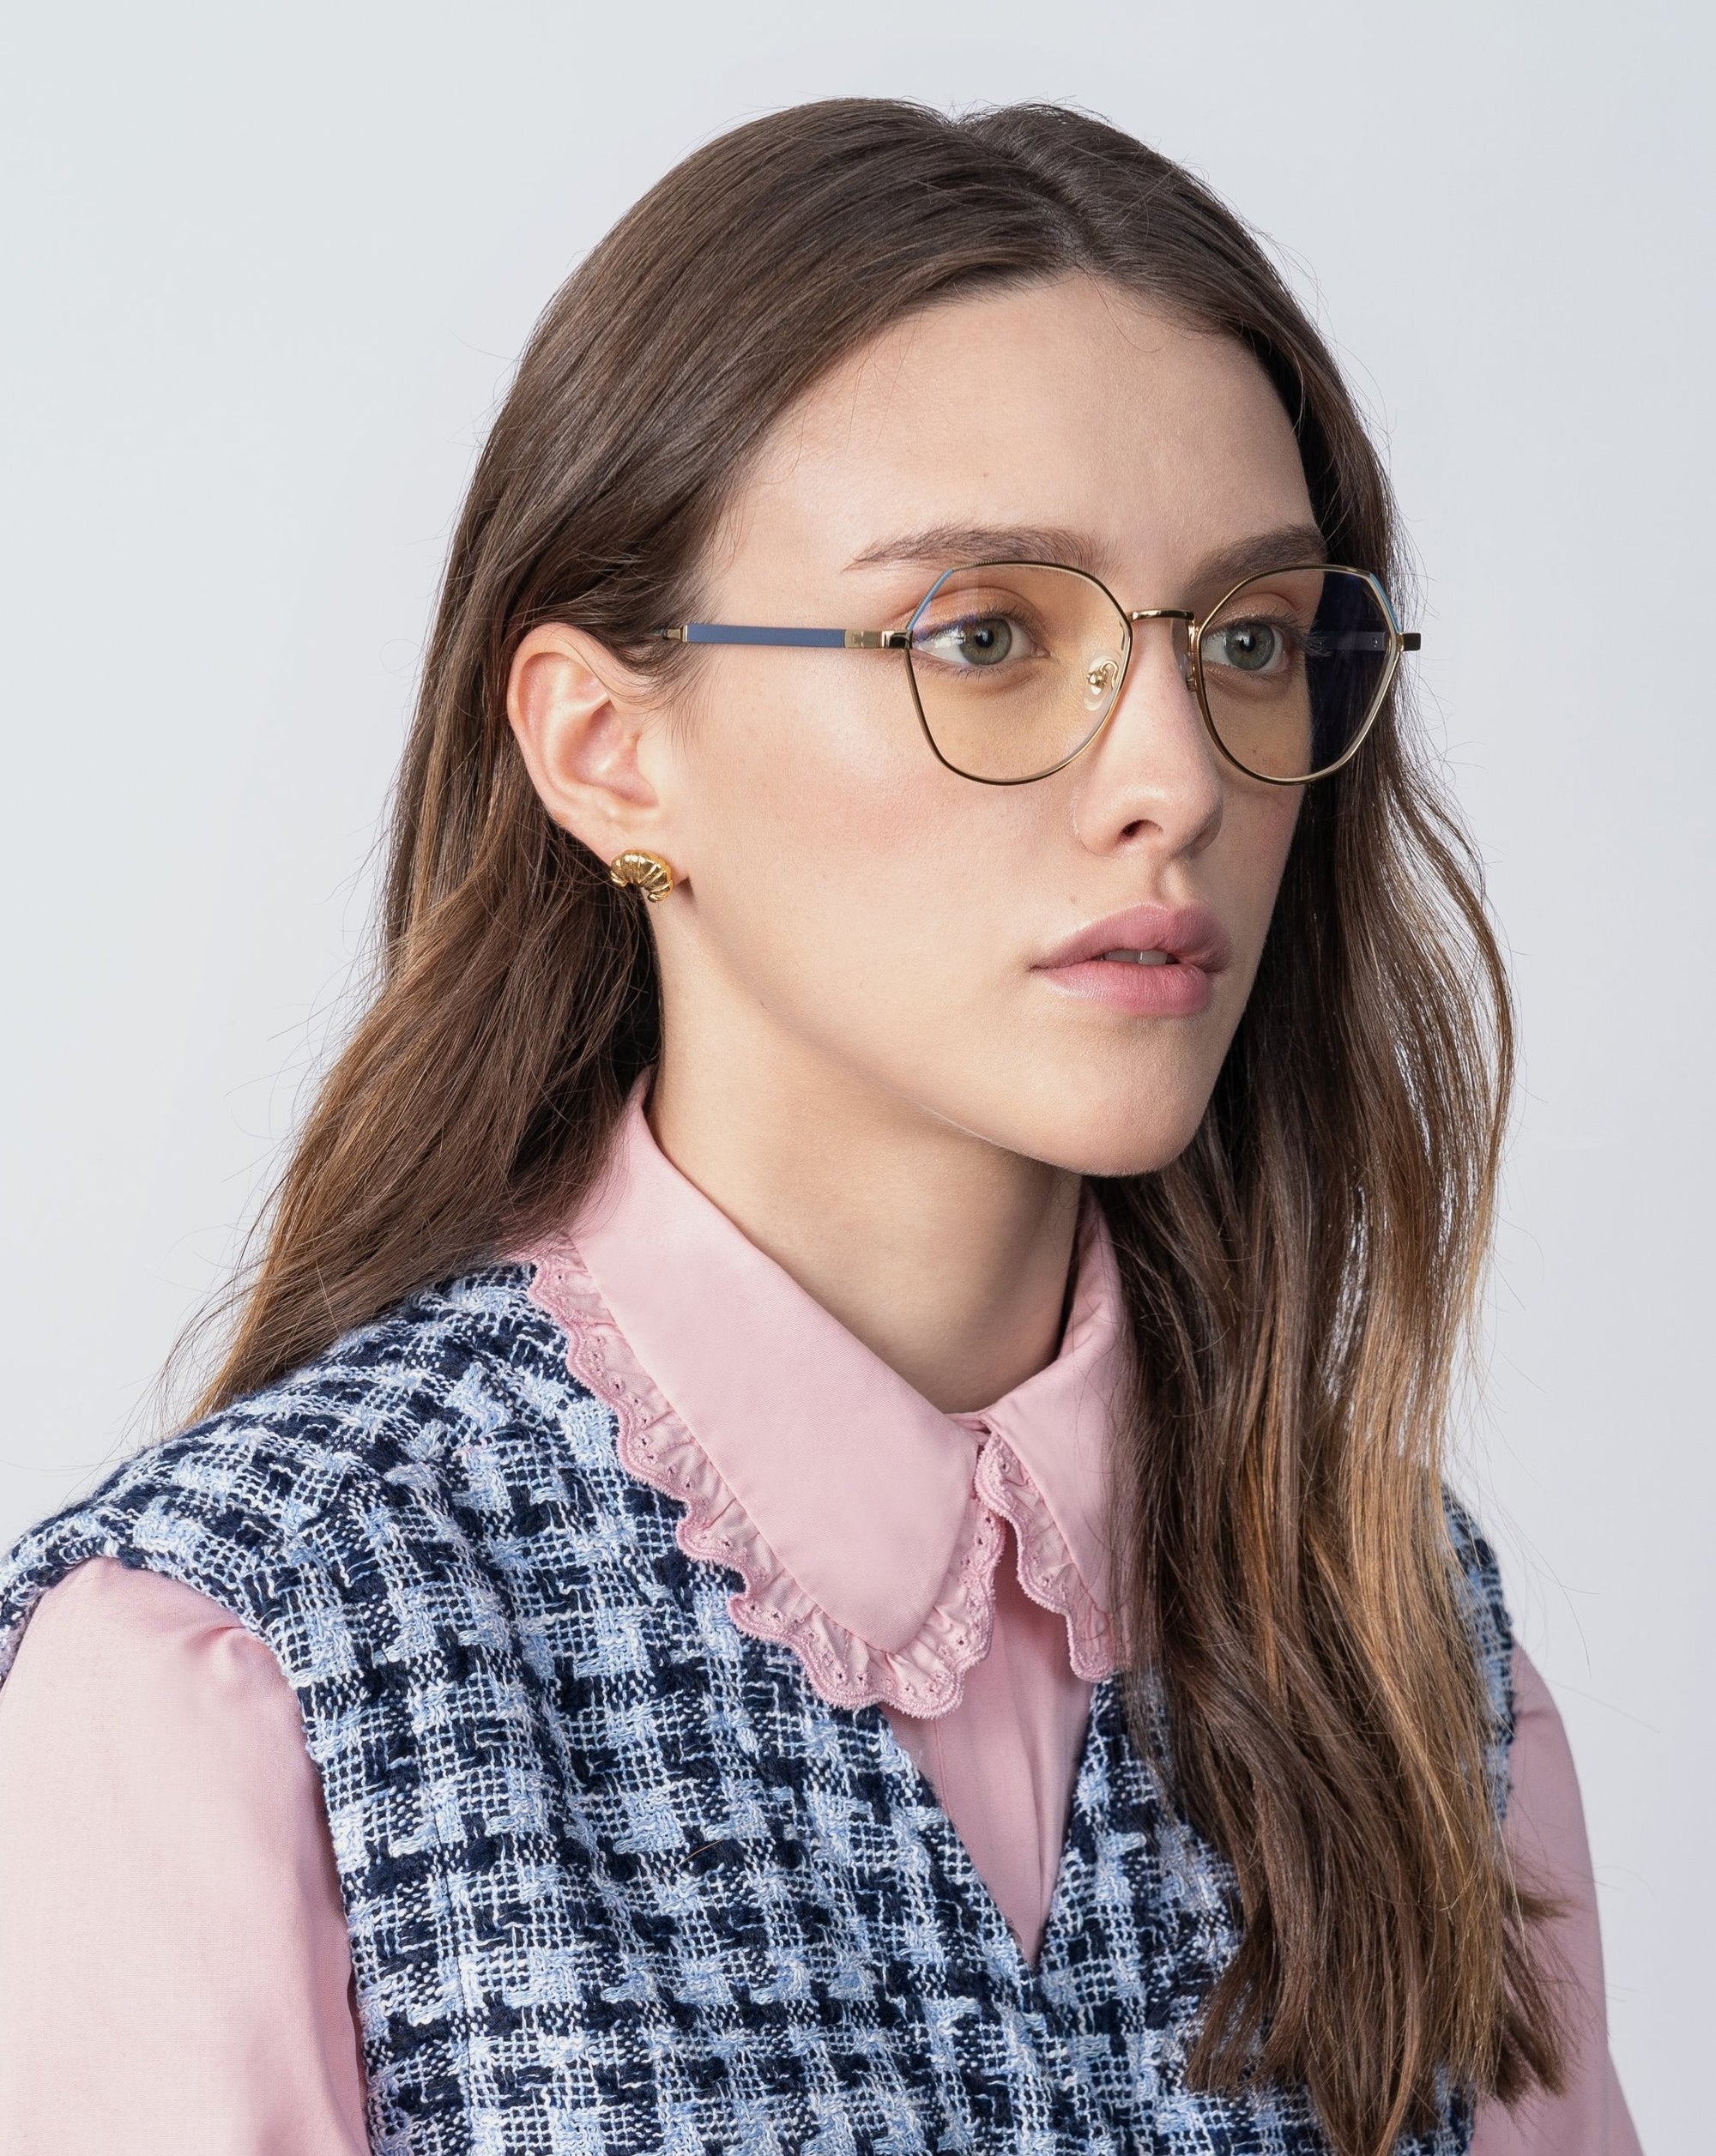 A woman with long hair wearing gold-rimmed For Art&#39;s Sake® Orchard glasses featuring prescription lenses and a blue light filter, a pink blouse with a lace collar, and a blue and white plaid vest. She has small 18-karat gold-plated earrings and is looking slightly to the left with a neutral expression. The background is plain and light-colored.